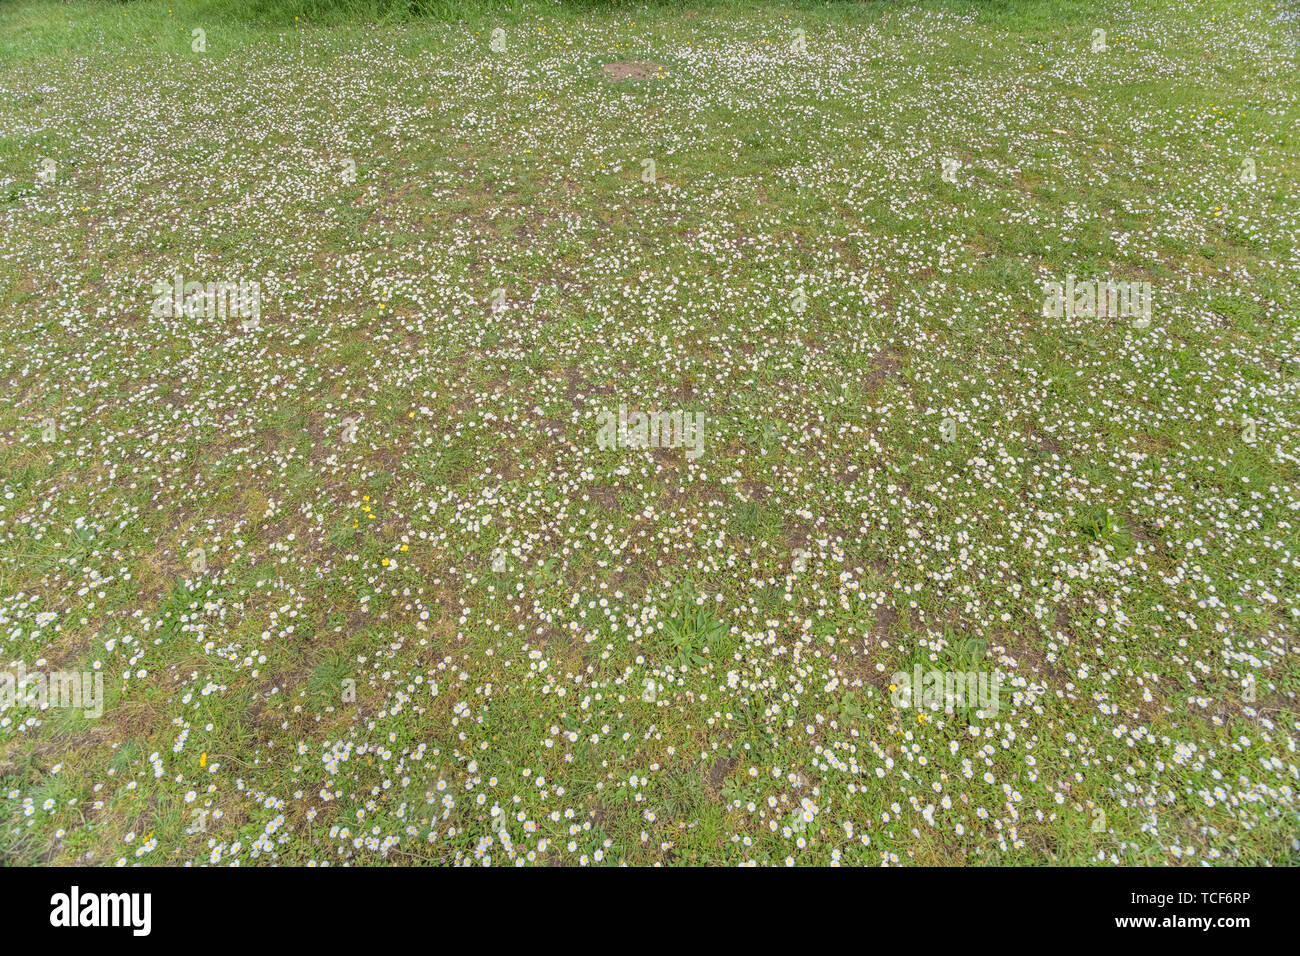 Mass of white English Daisies / Bellis perennis overtaking an area of lawn. Bellis perennis is a common UK garden weed. Once used as a medicinal tea. Stock Photo